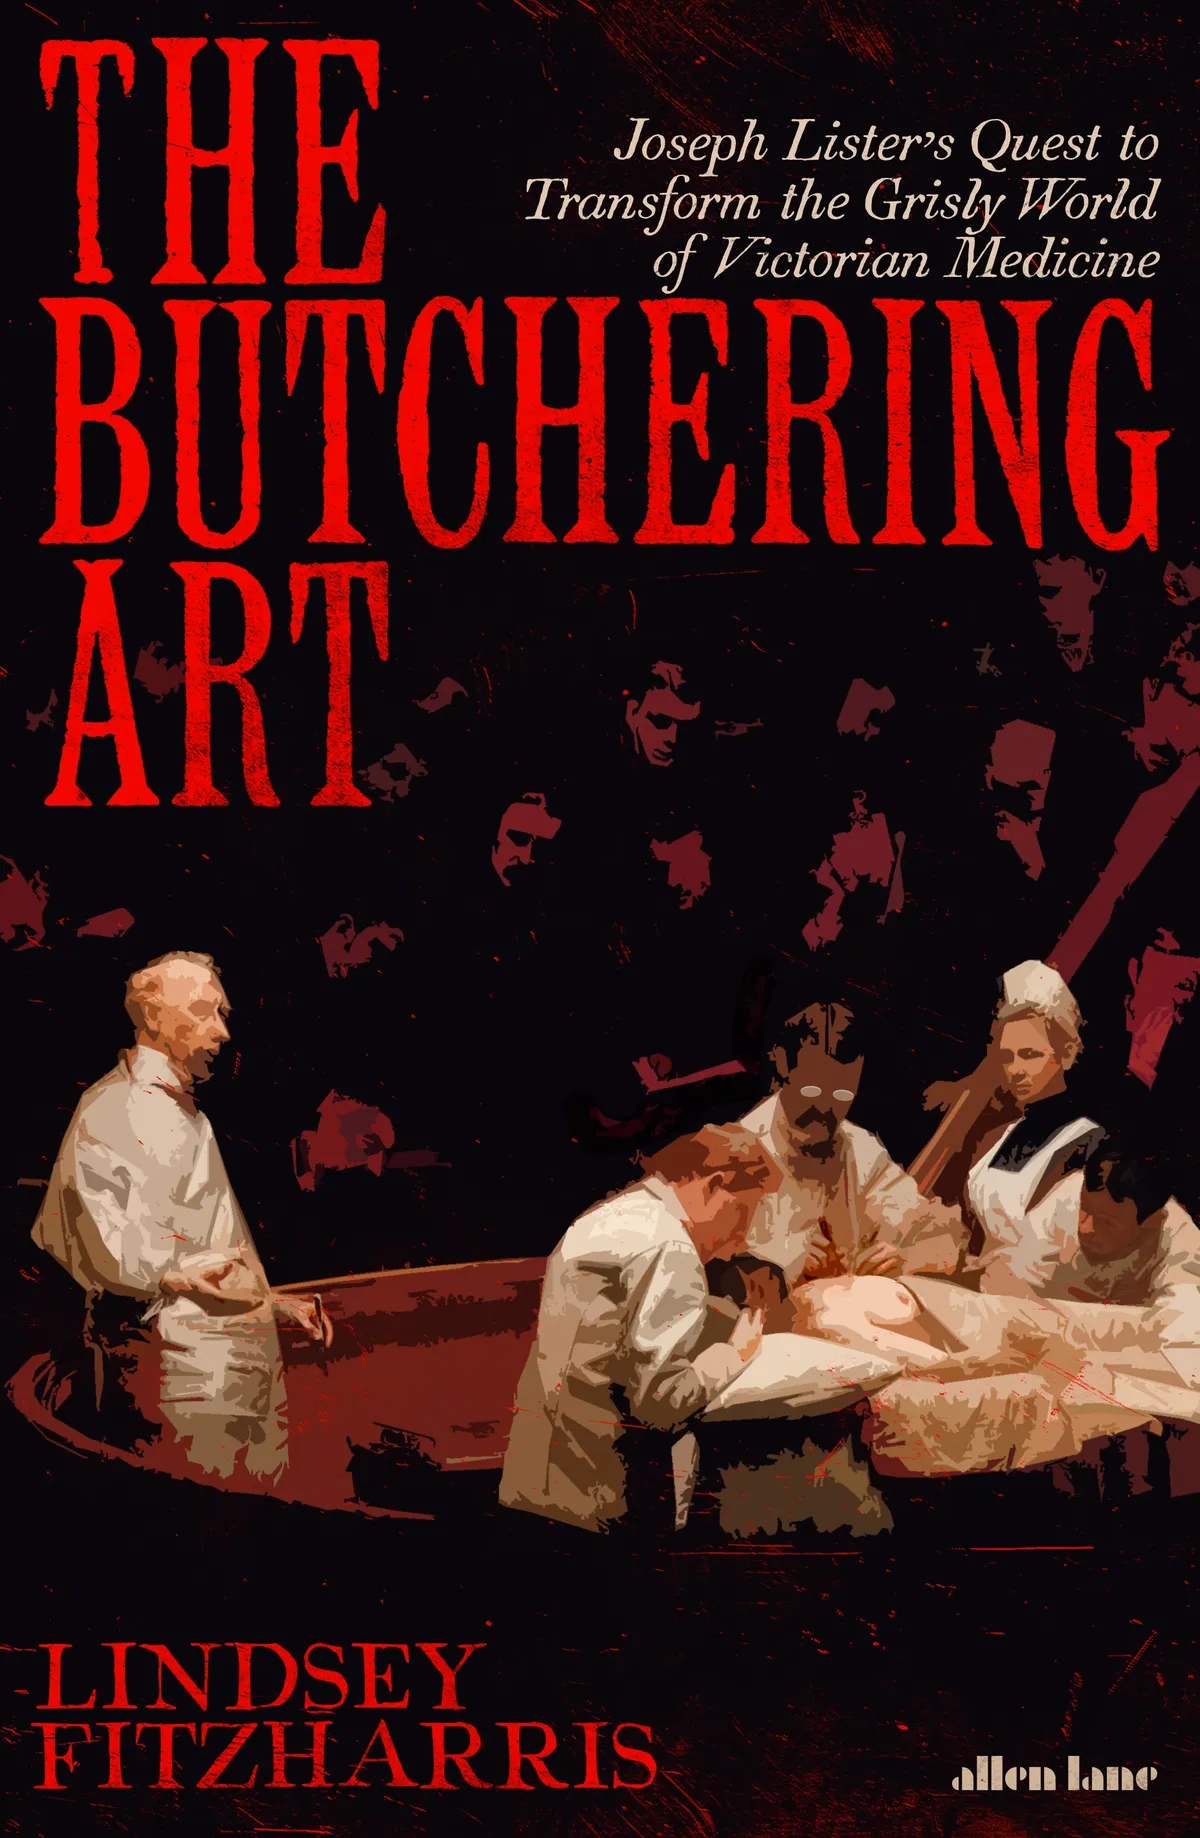 The Butchering Artby Lindsey Fitzharris is out now (£16.99, Allan Lane)